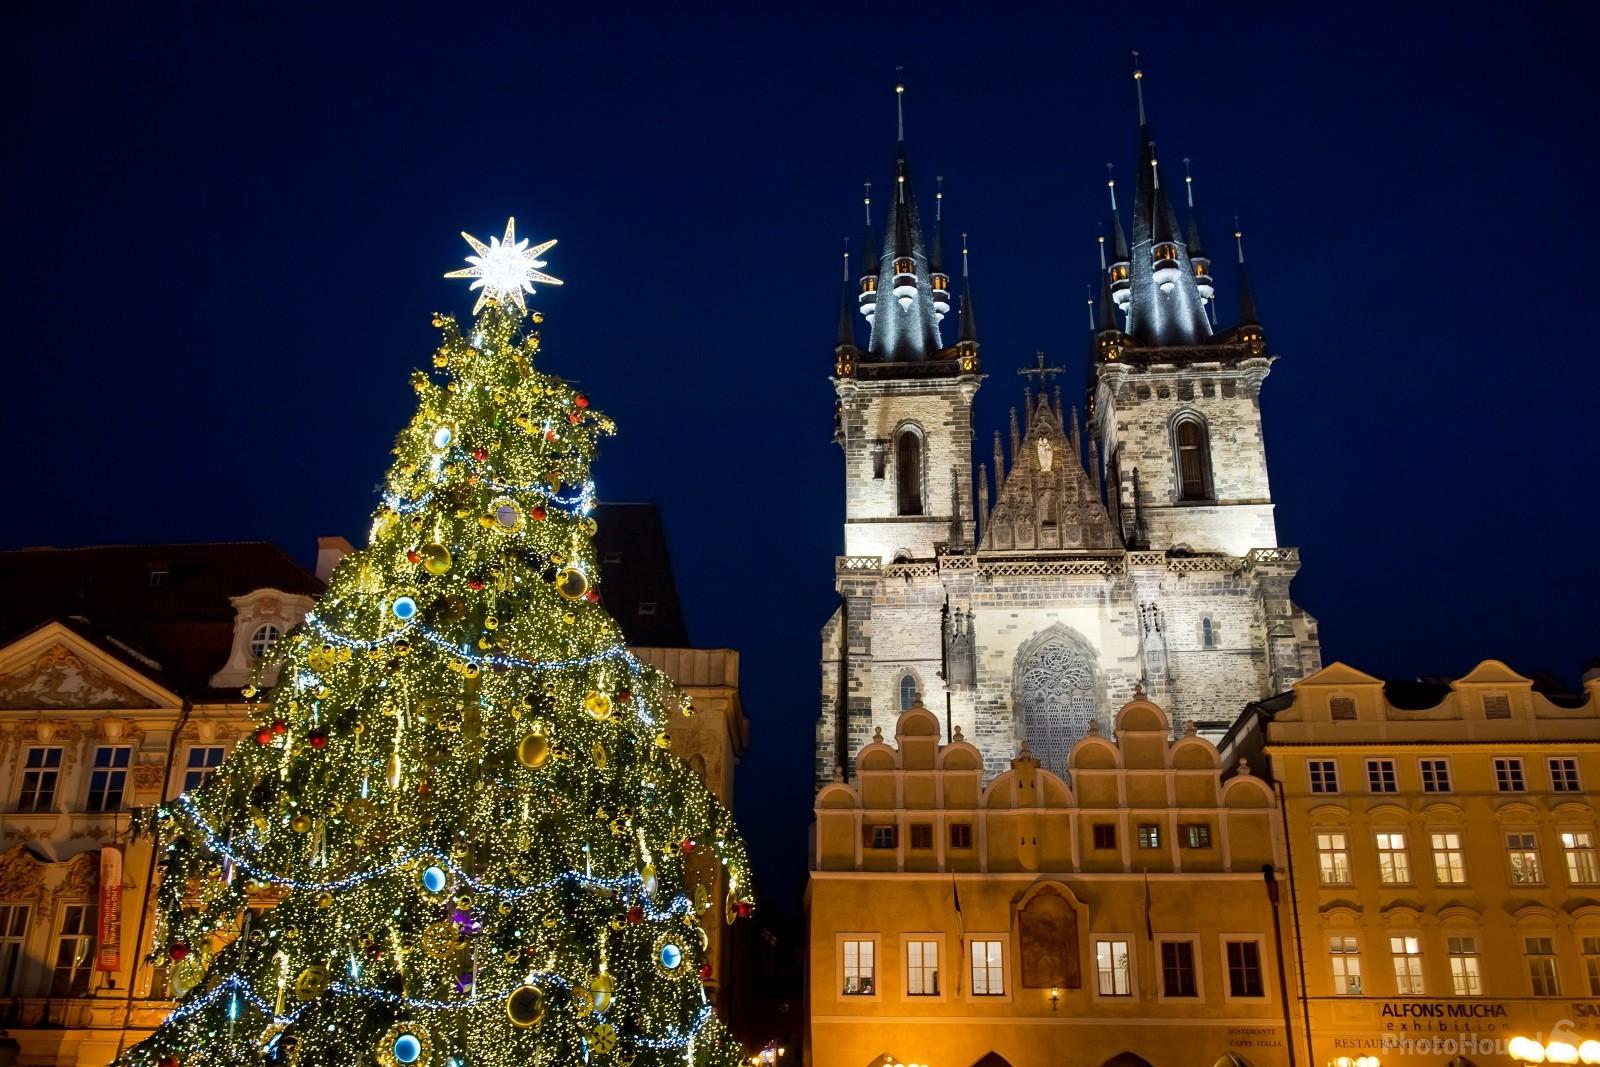 Image of Prague Christmas Market at Old Town Square by VOJTa Herout